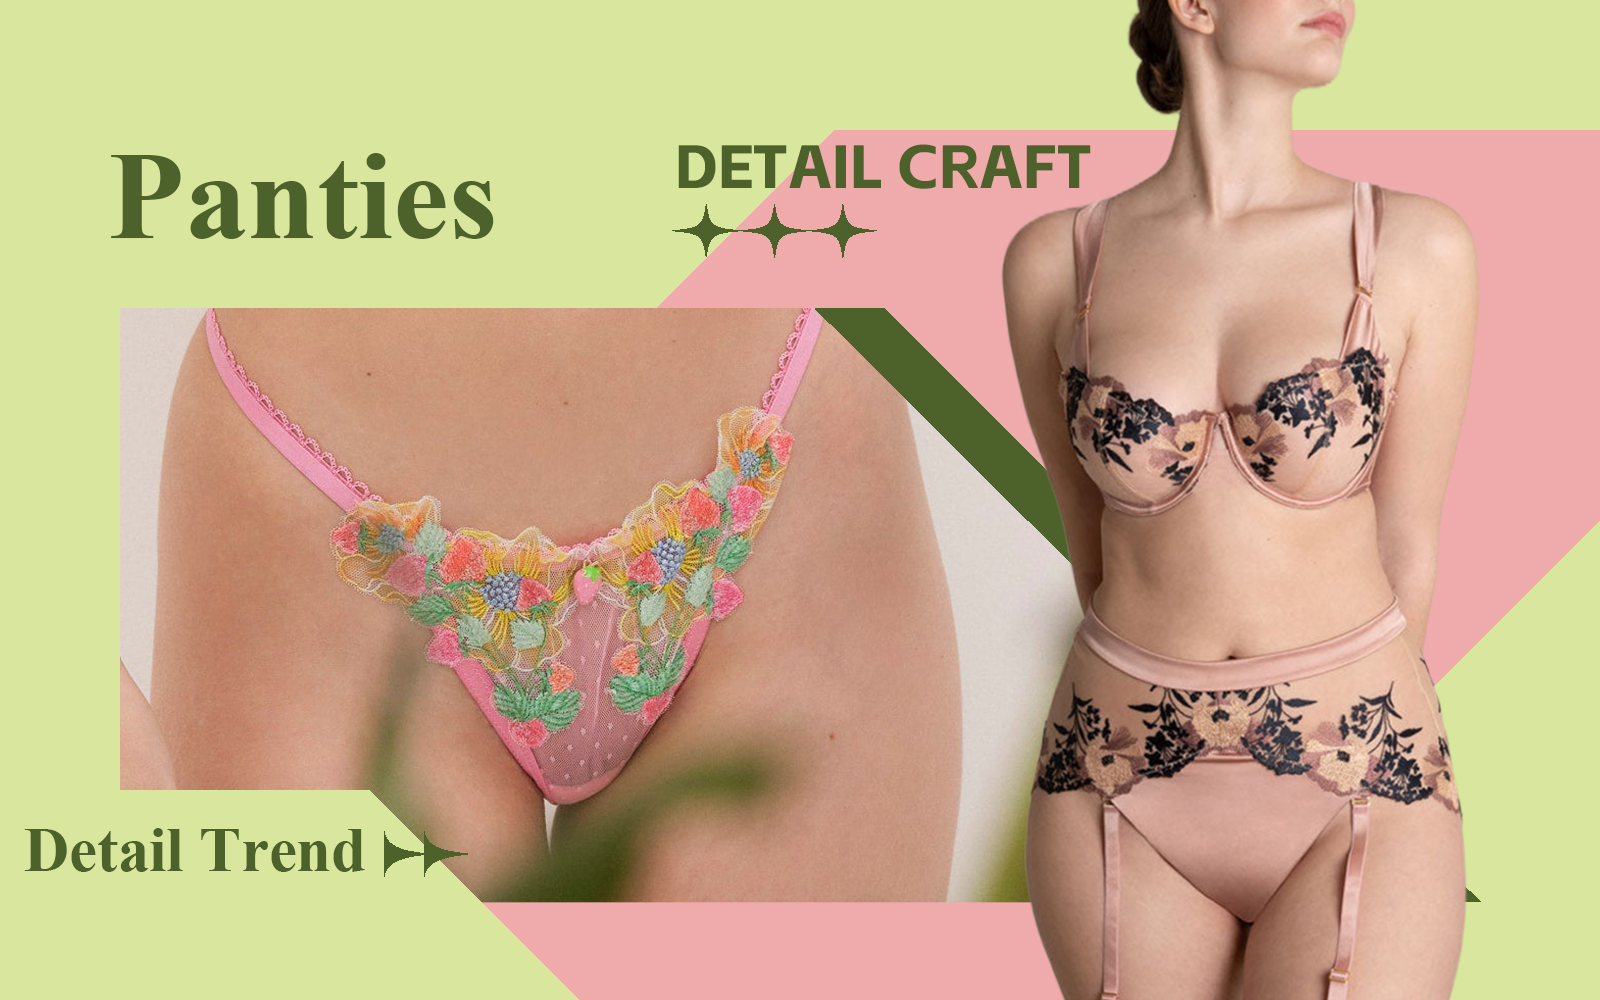 The Detail & Craft Trend for Women's Panties